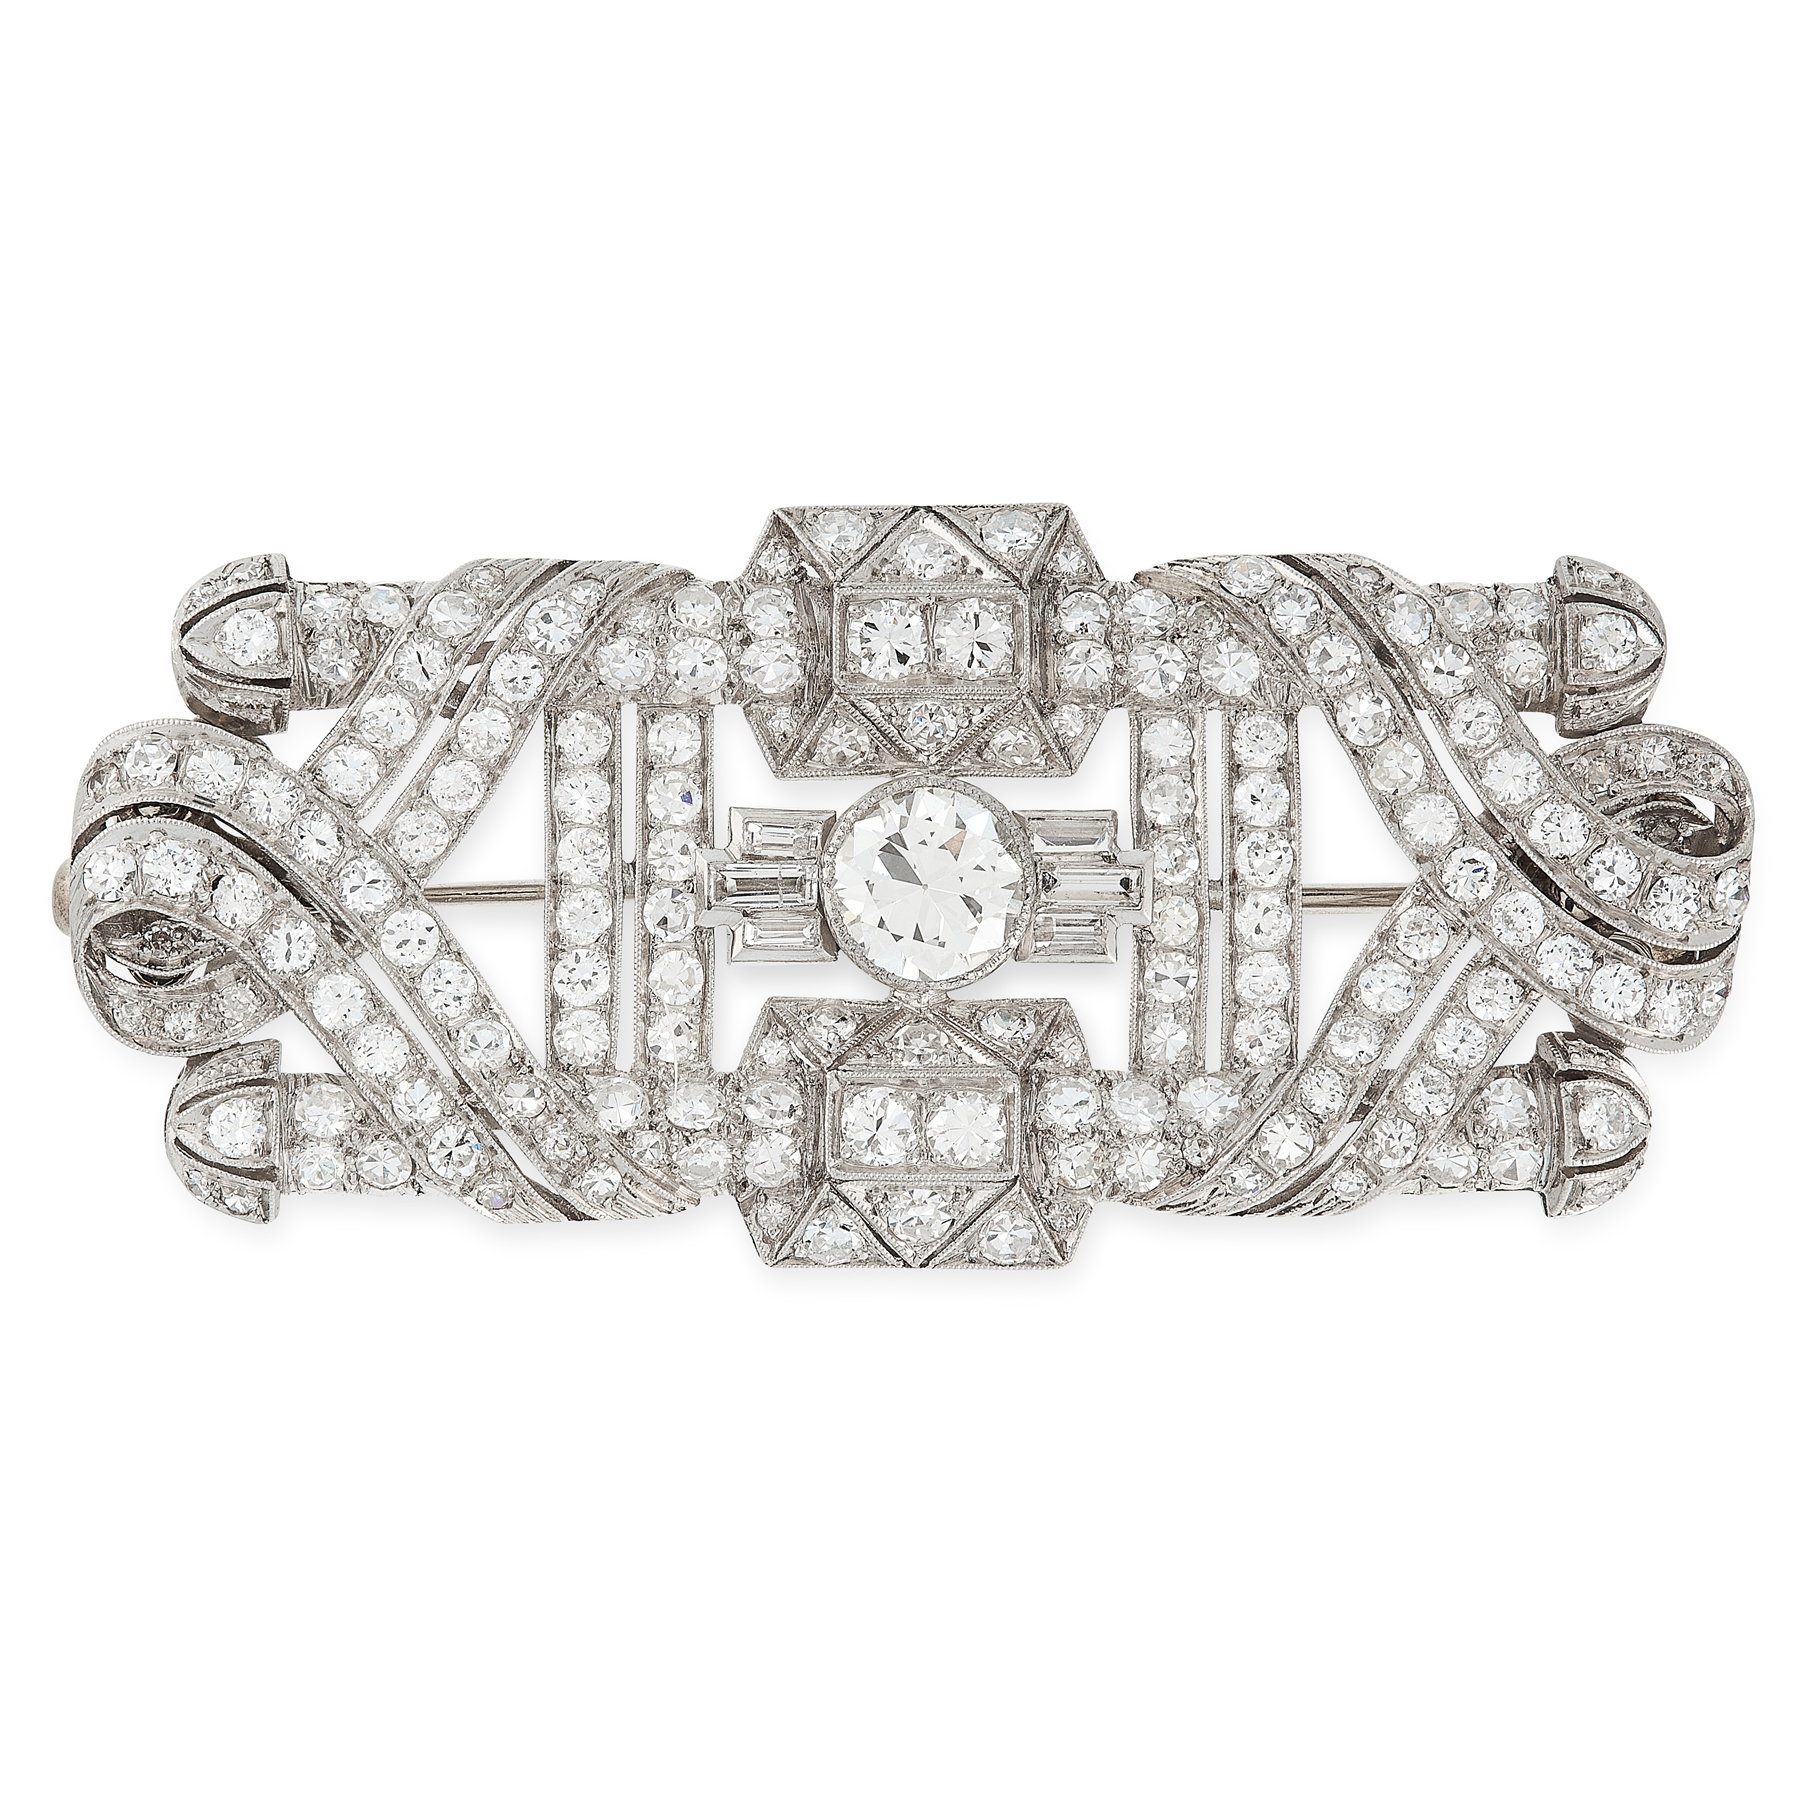 A DIAMOND BROOCH, CIRCA 1930 in platinum, the rectangular body set with a central transitional cut